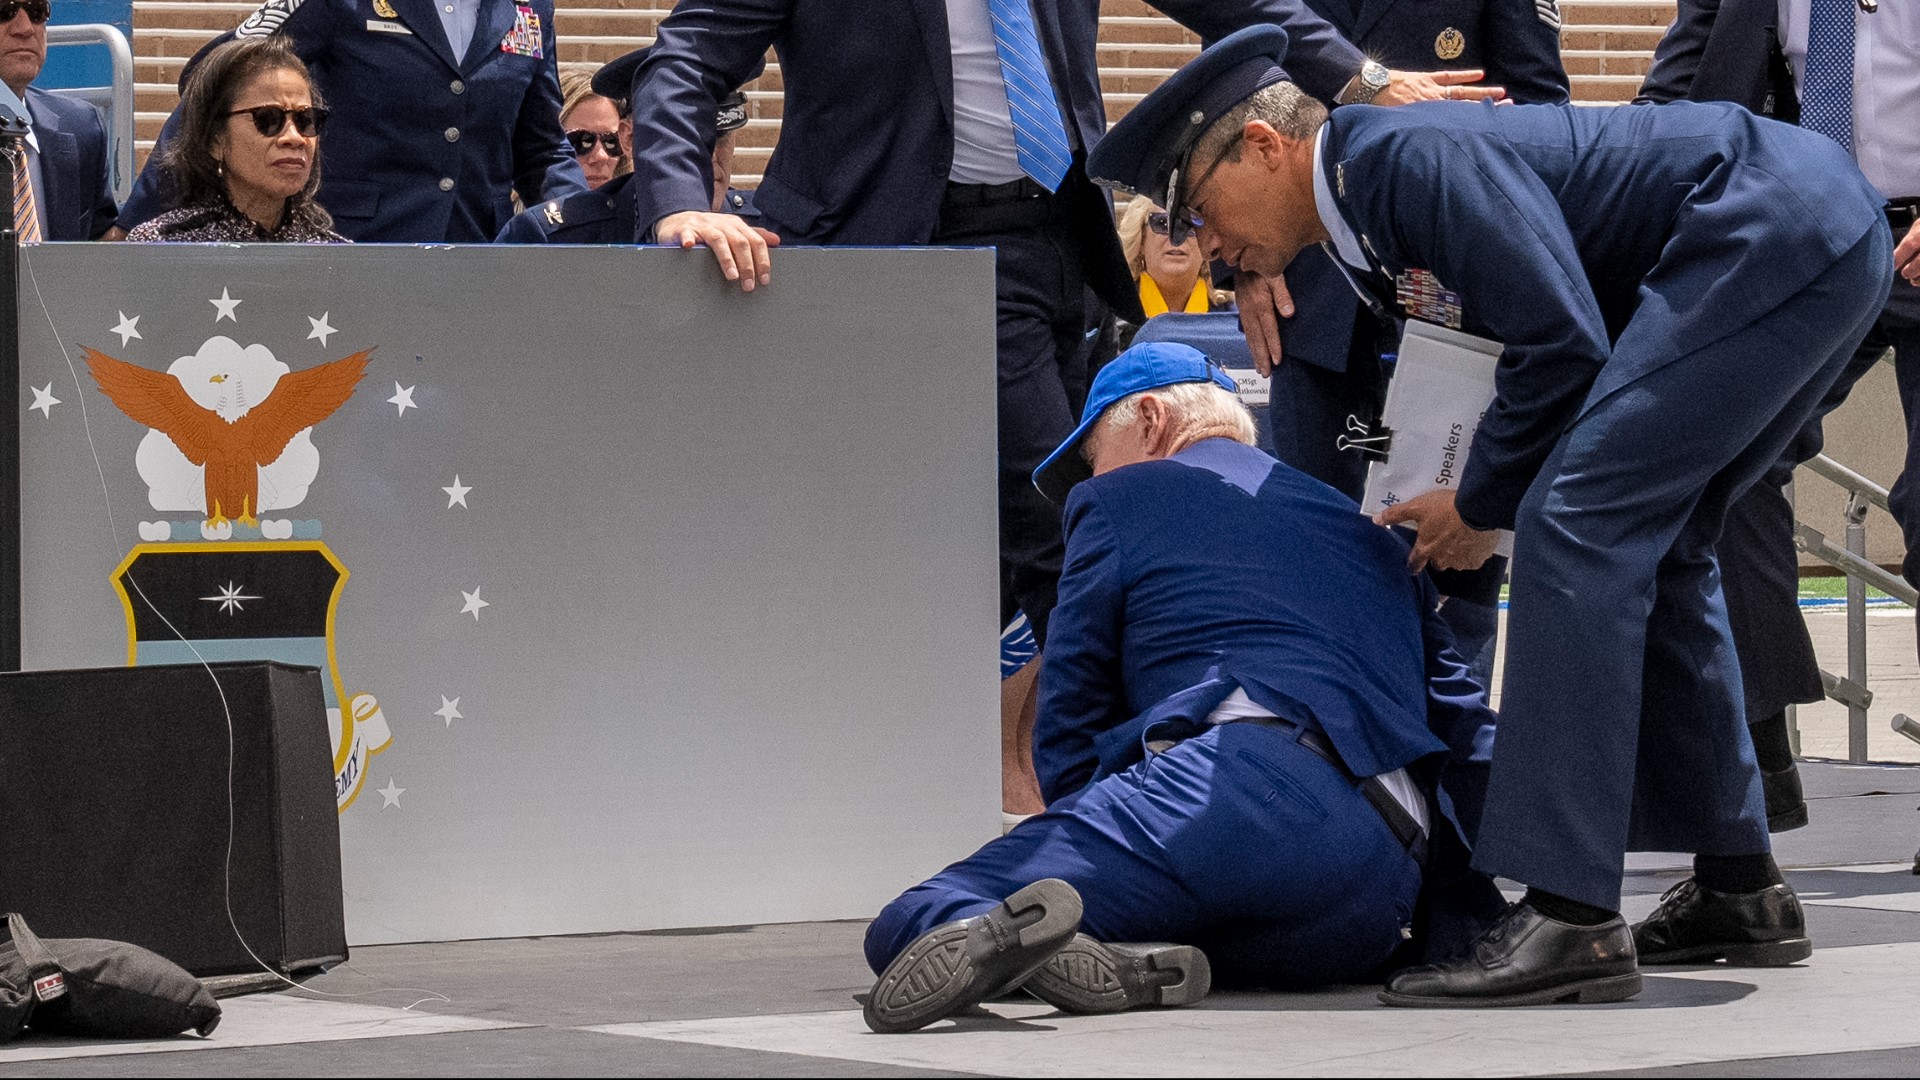 Near the end of the Air Force graduation ceremony, the 80-year-old president turned to walk across the stage and tripped. He was quickly helped up.